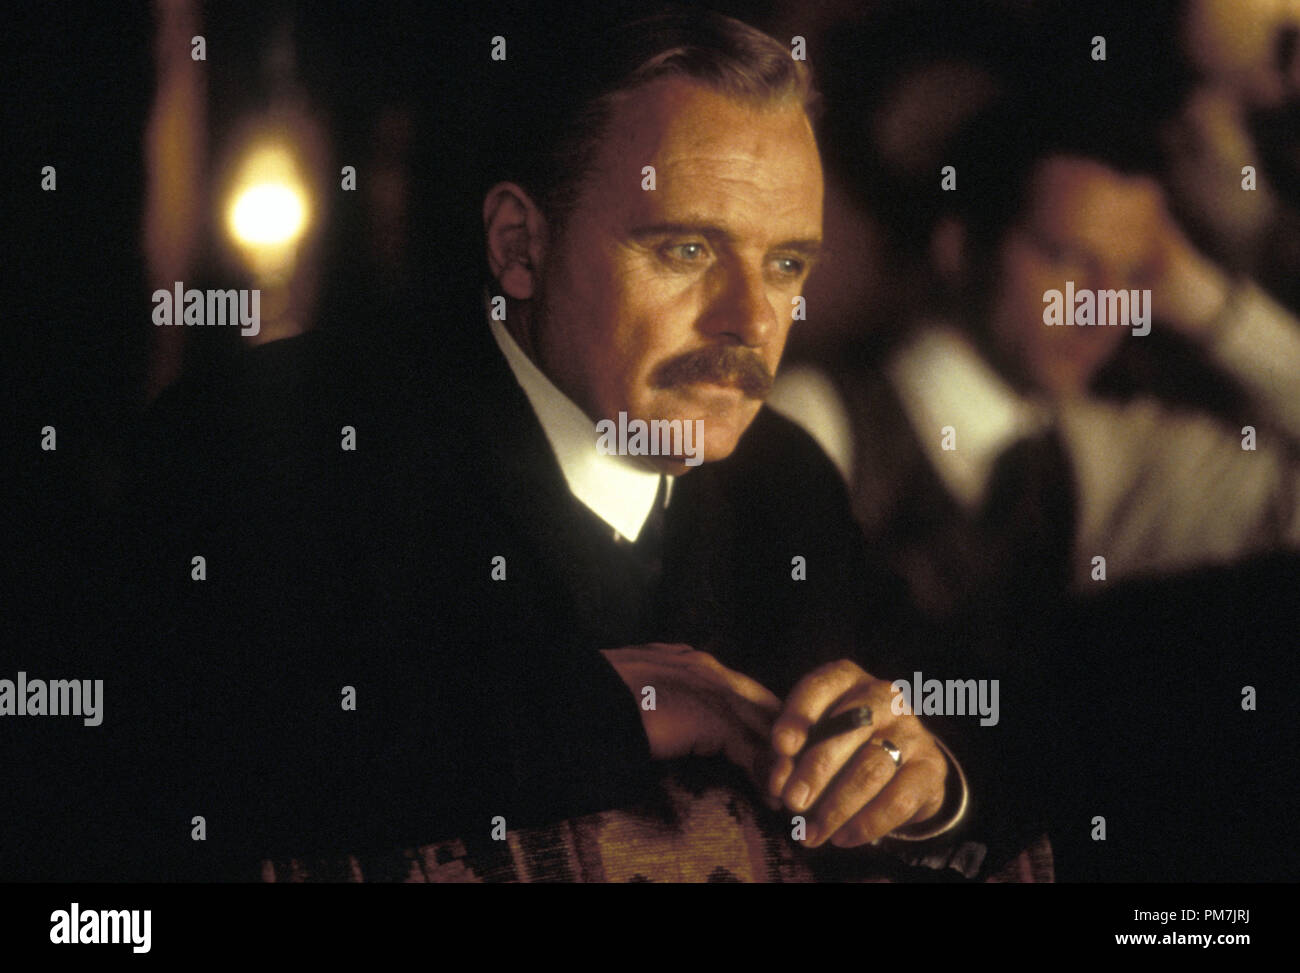 Film Still from 'Legends of the Fall' Anthony Hopkins © 1994 TriStar Pictures Photo Credit: Kerry Hayes    File Reference # 31129290THA  For Editorial Use Only - All Rights Reserved Stock Photo